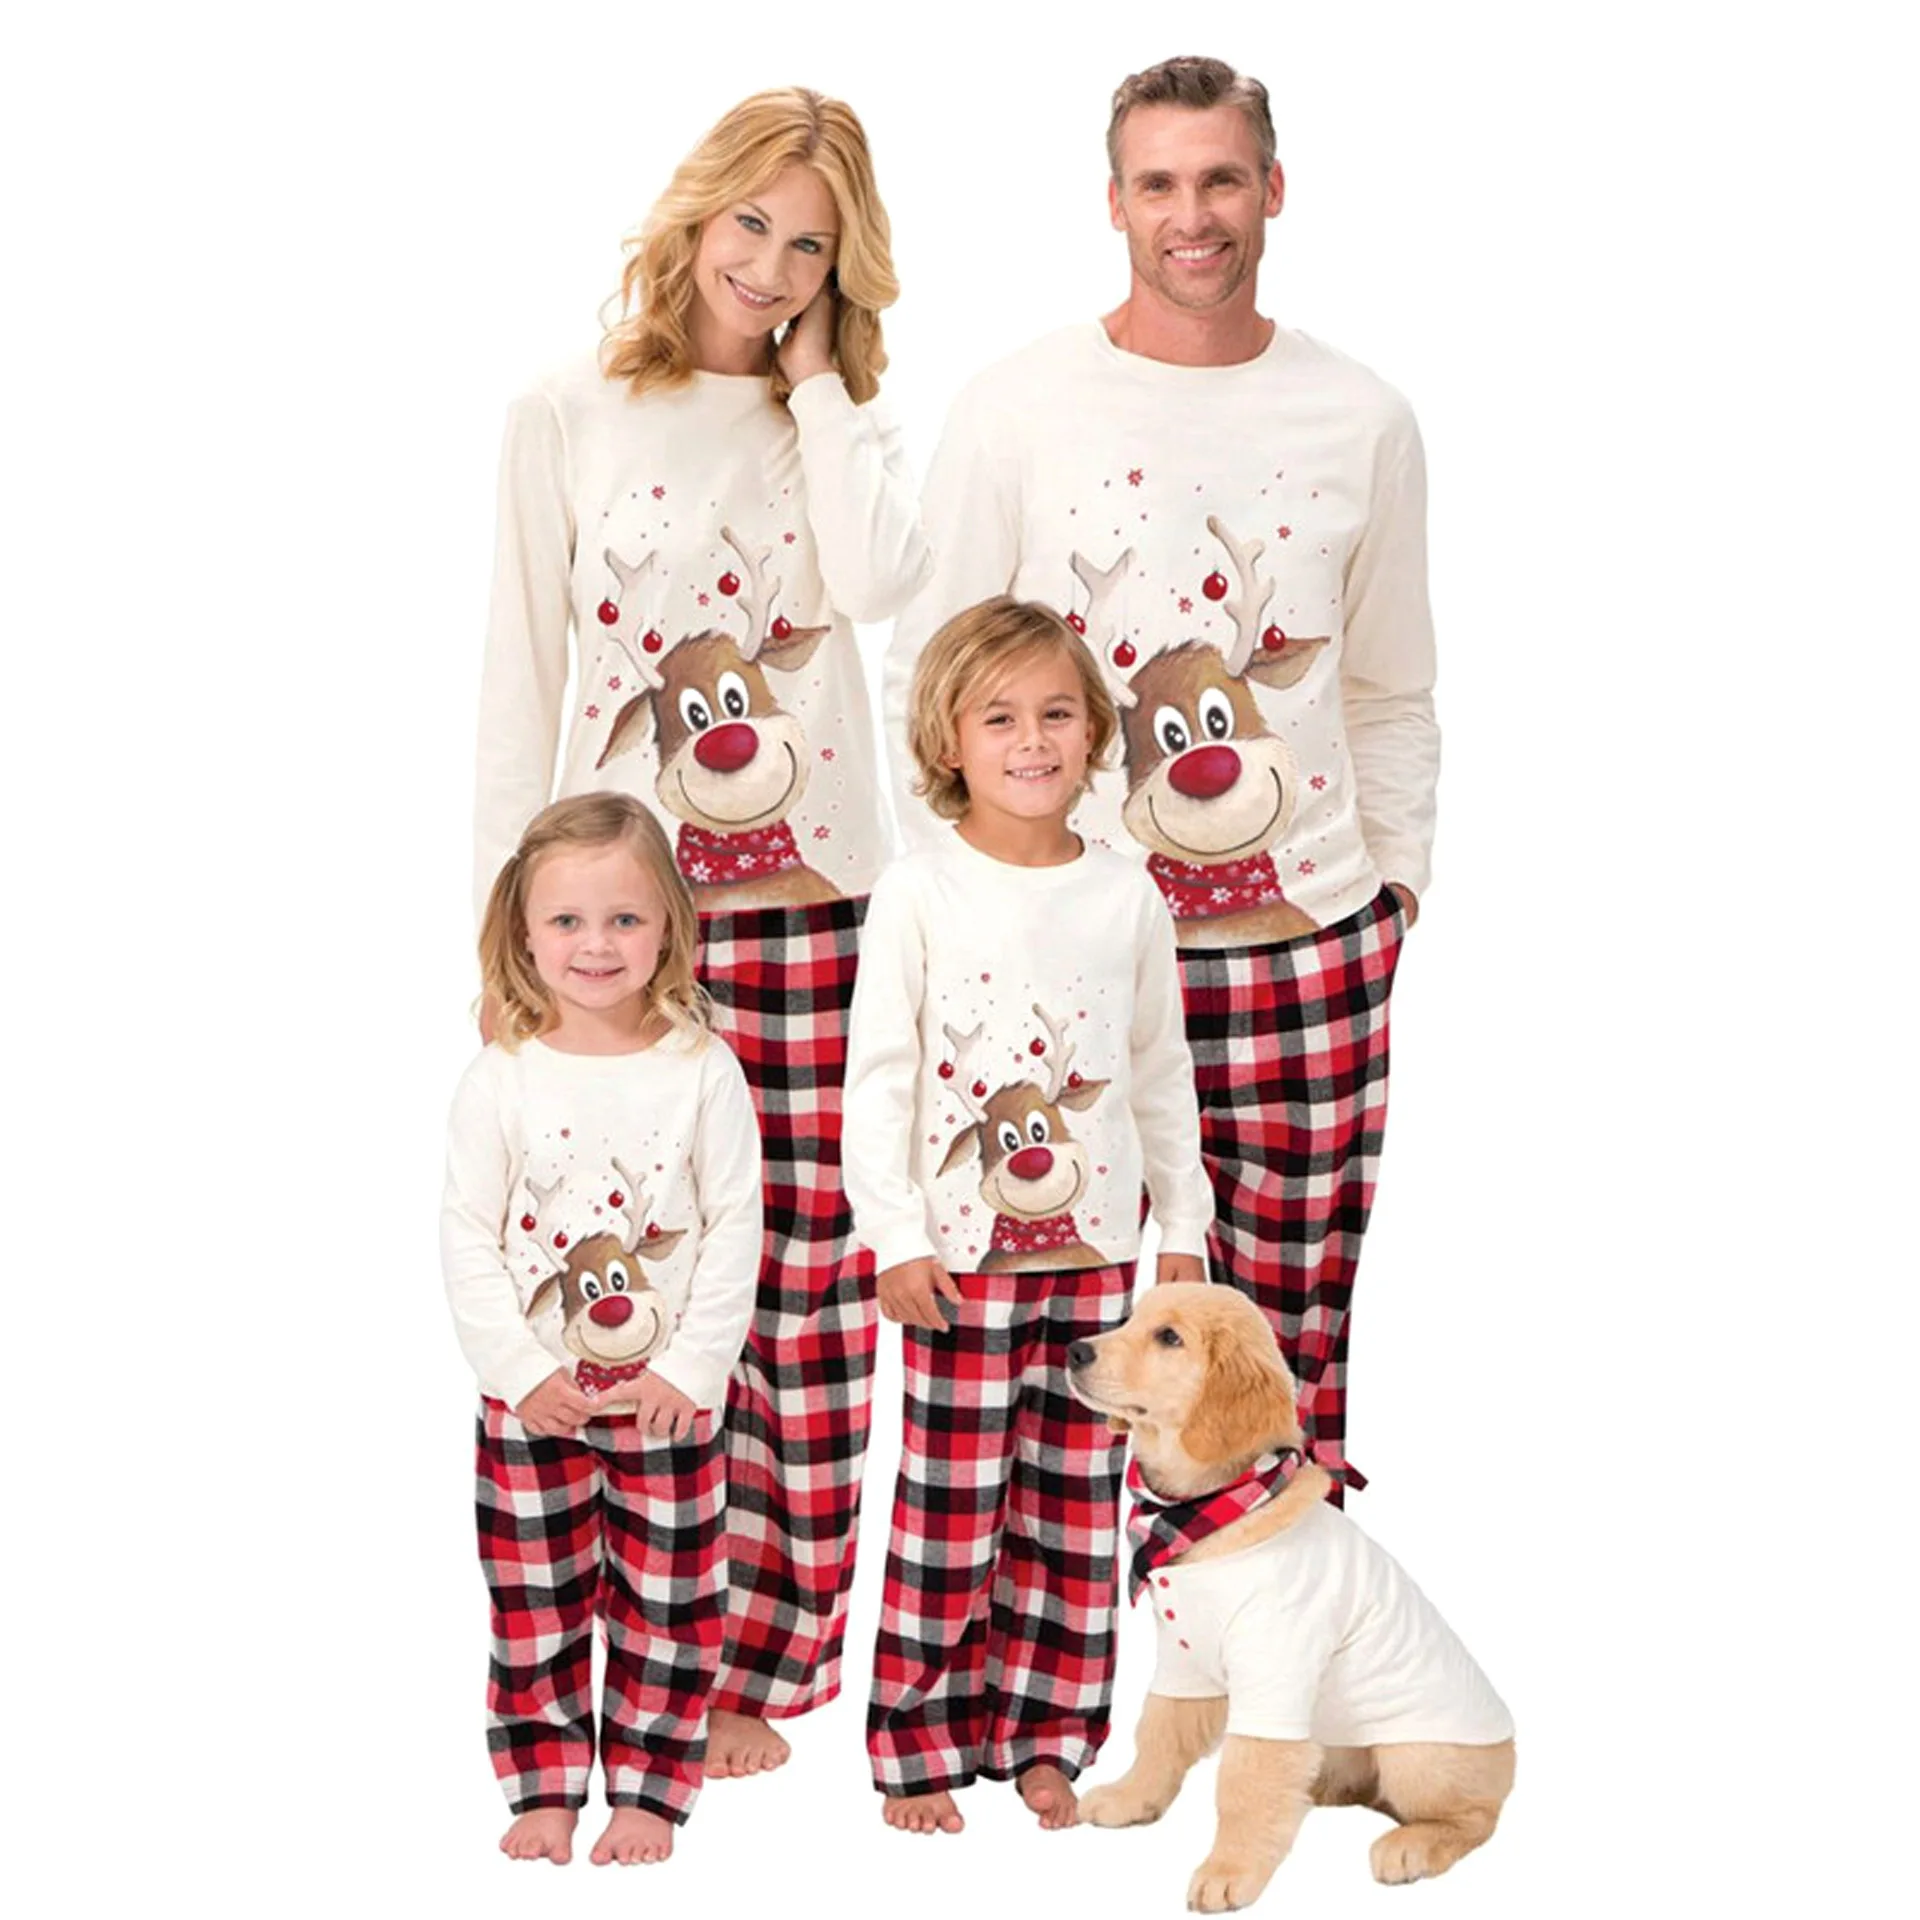 

2021 Kids Sleepwear Parent-child Suit Christmas Pajamas Sets Home Wear Dog Wear Family Matching Clothing, Picture shows